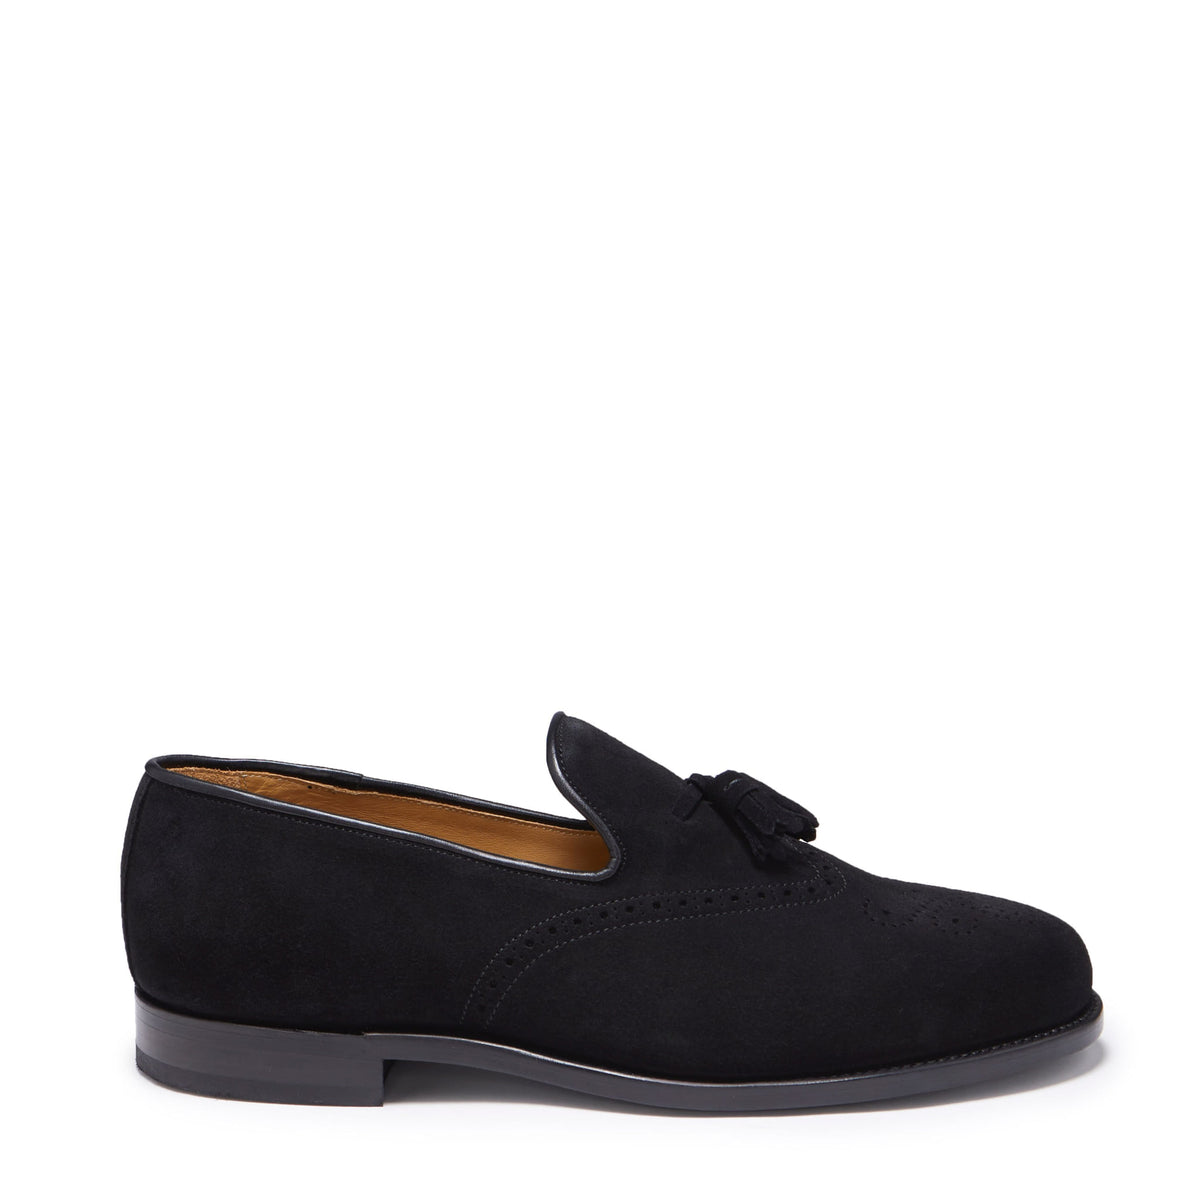 Hugs &amp; Co. Black Suede Tasselled Brogues, Welted Leather Sole